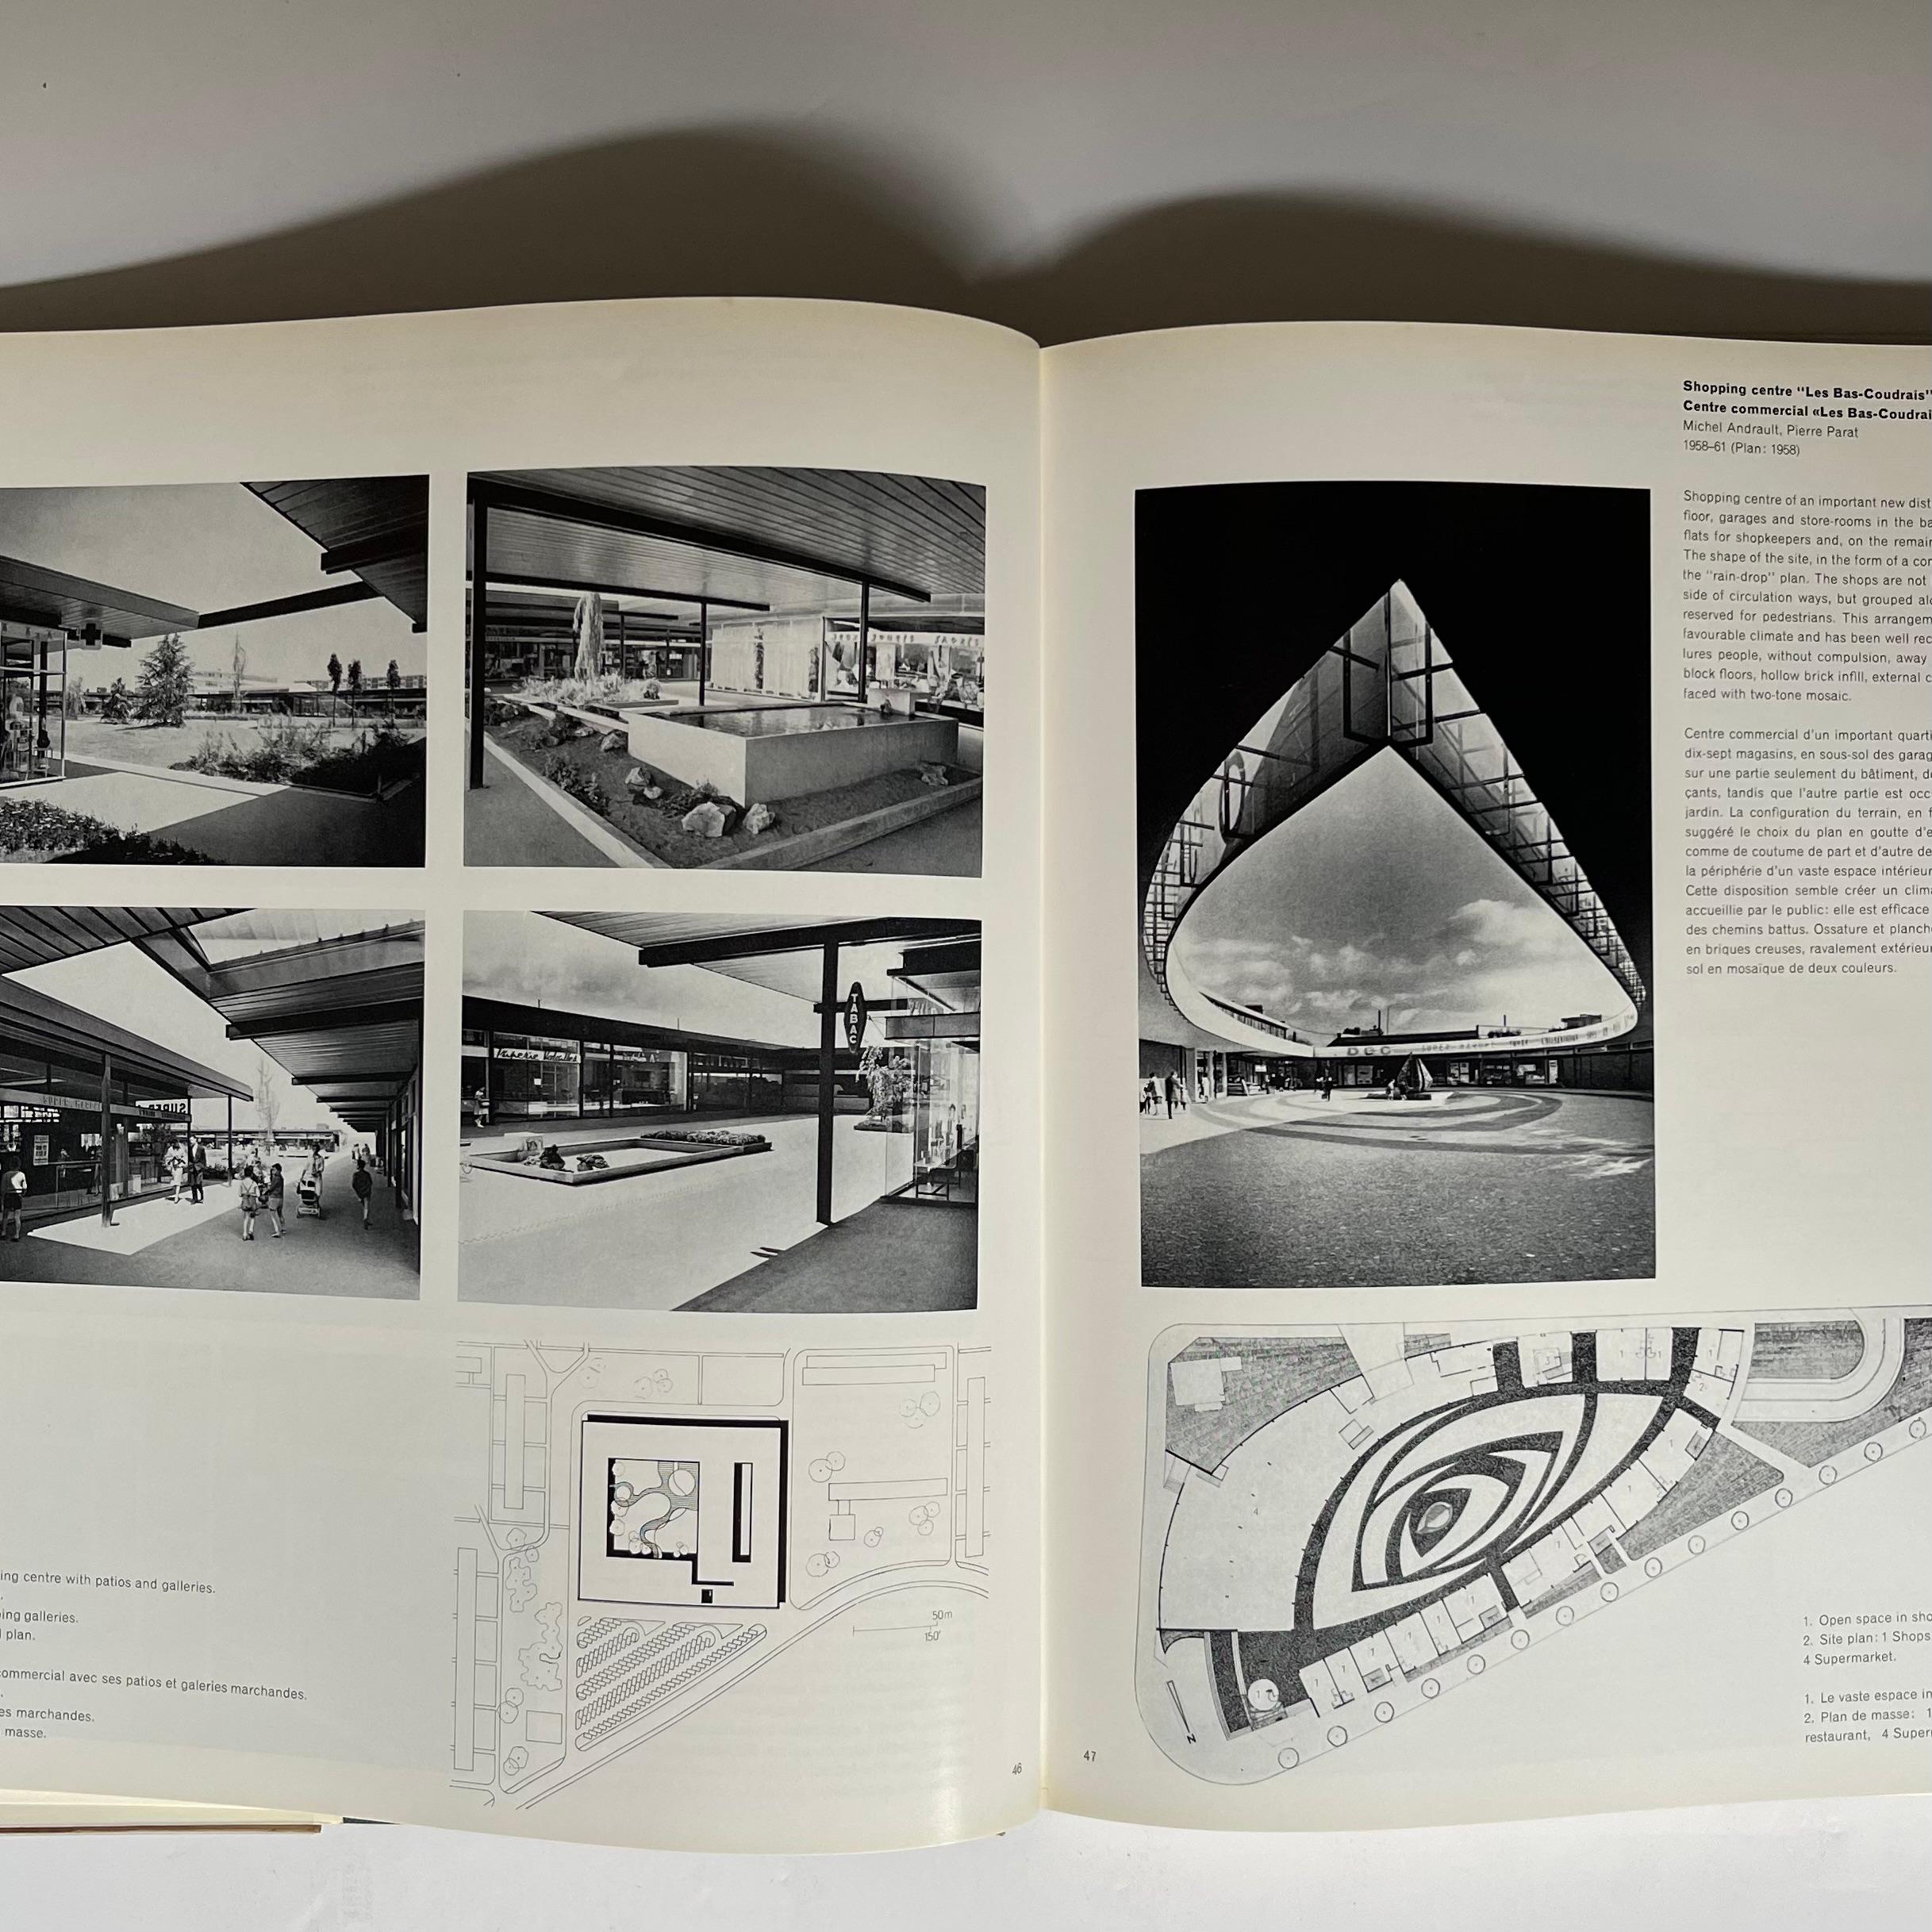 Published by Architectural Press 1967-  English and French text side-by-side.

Well-illustrated survey of the best in 1950s and 1960s French architecture. Includes many works by Jean Prouve plus buildings by Michel Ecochard, Le Corbusier, Paul